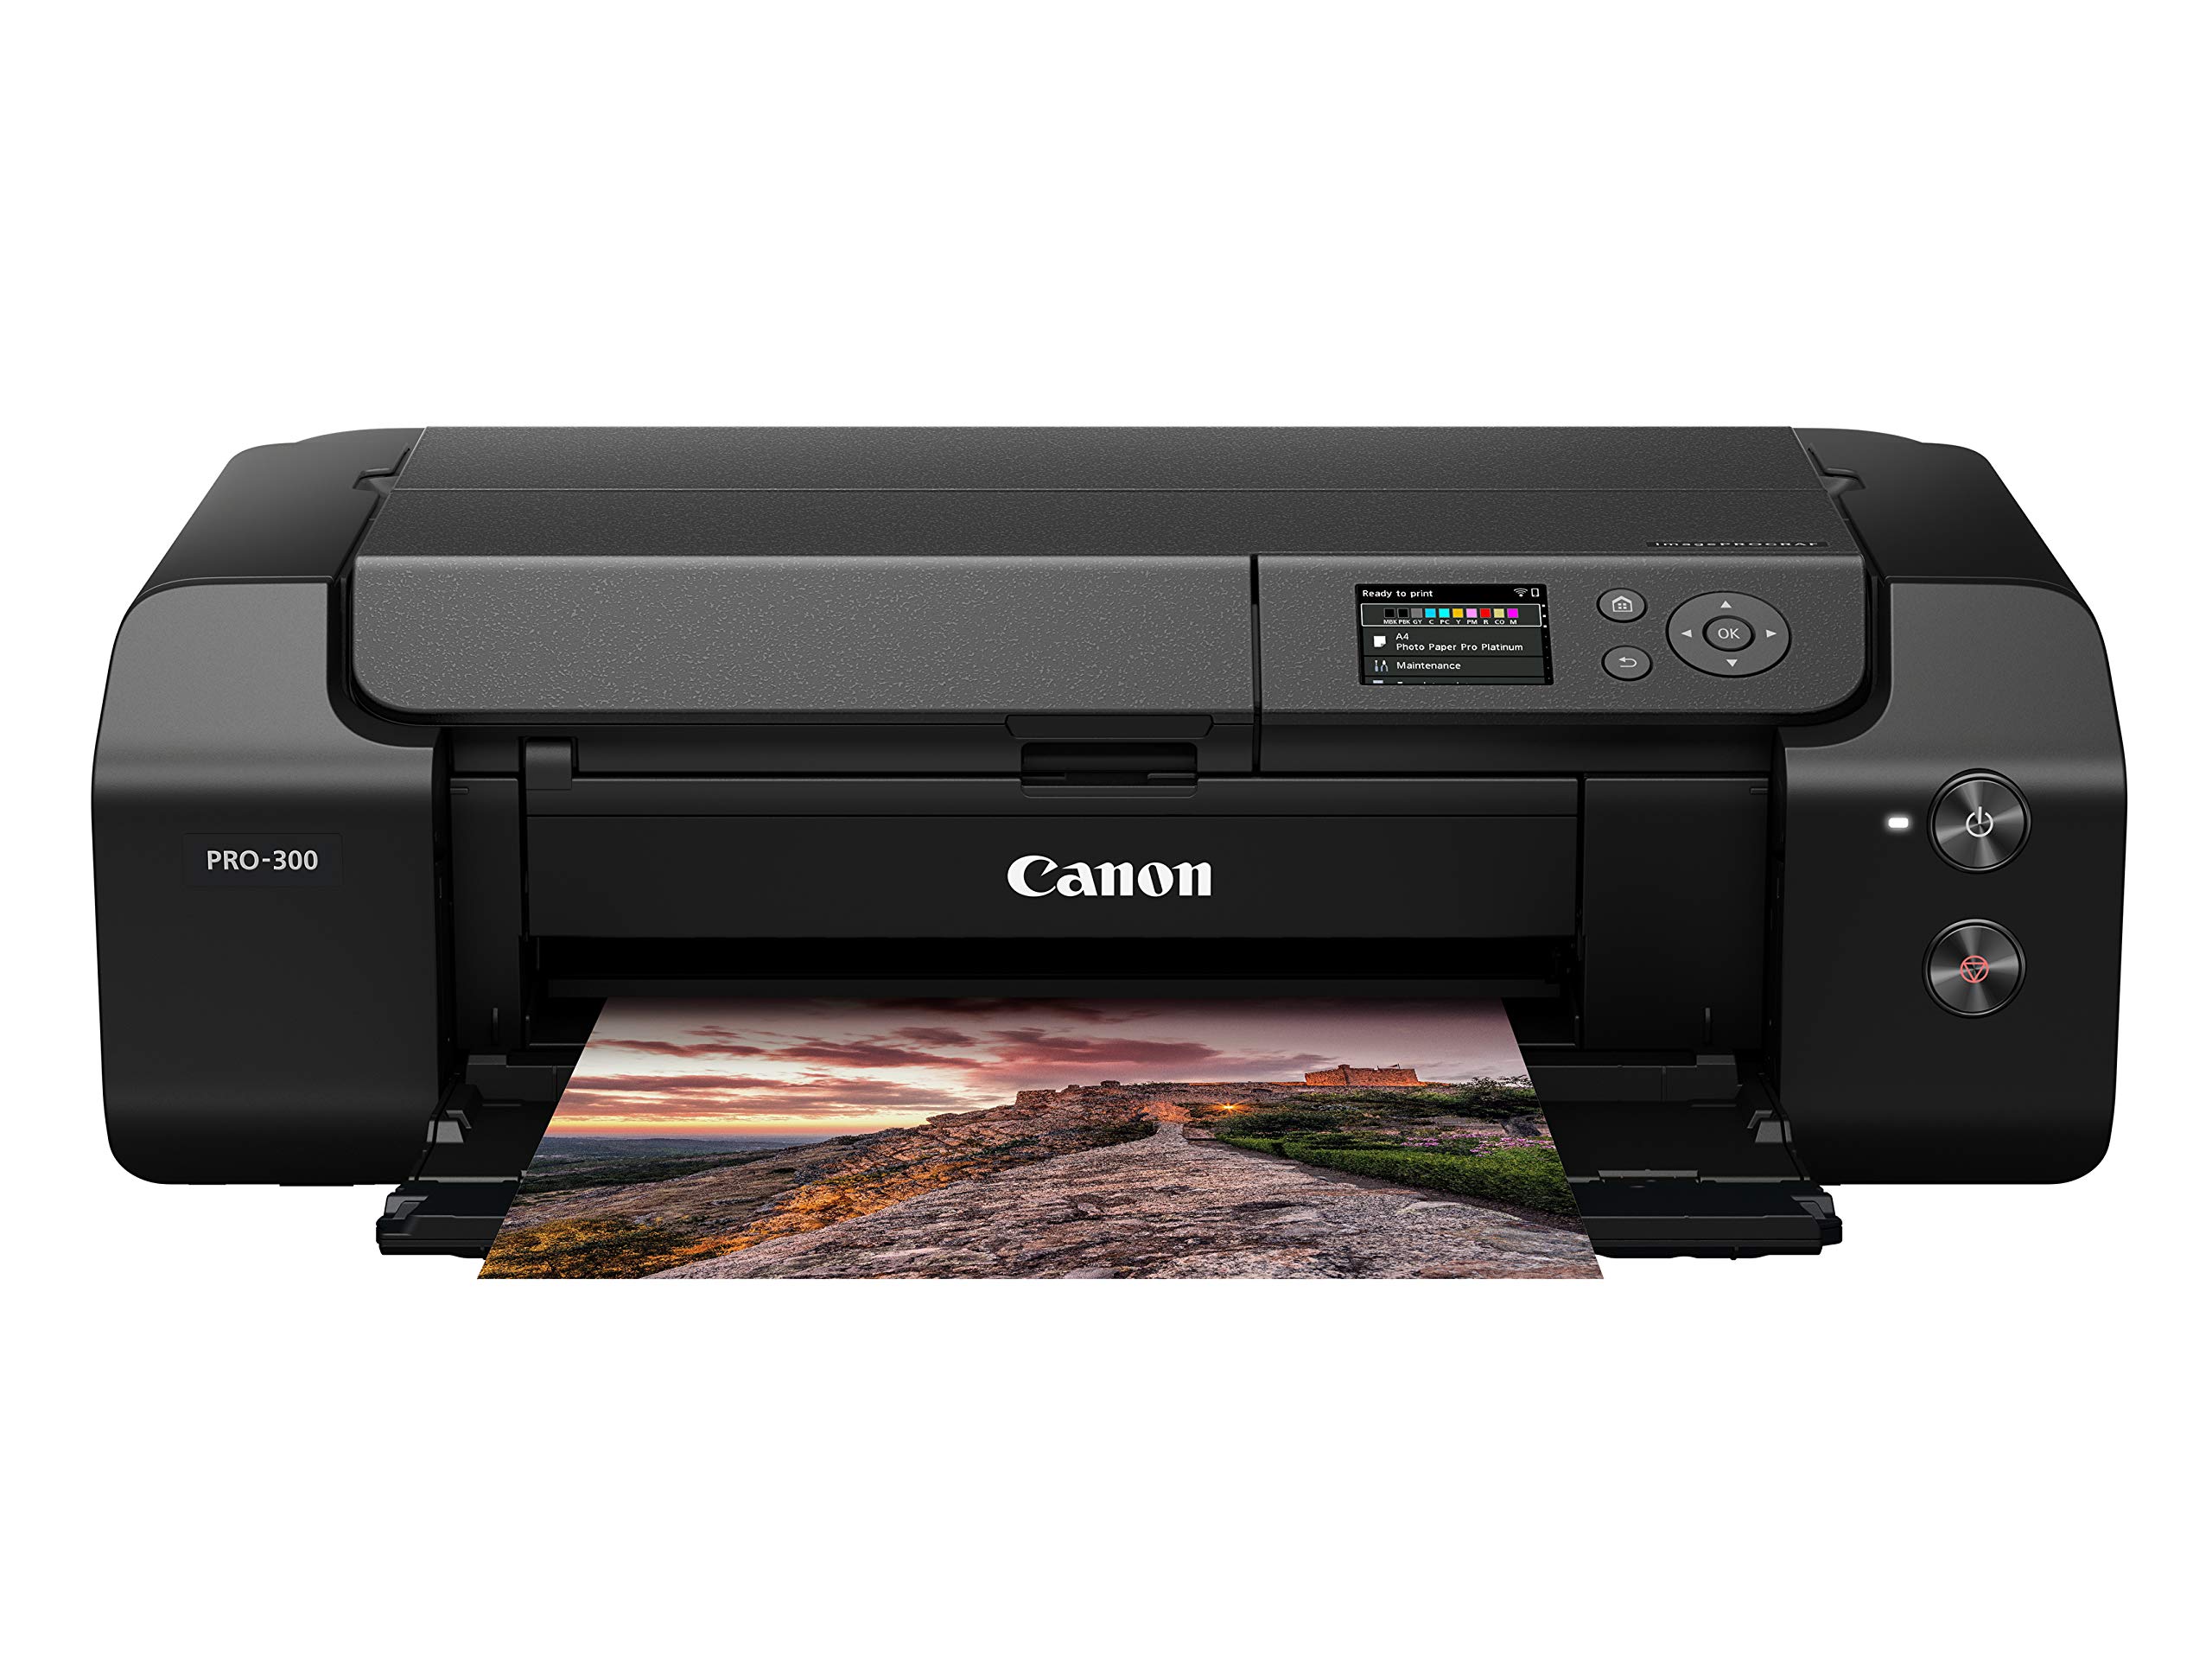 Canon imagePROGRAF PRO-300 Wireless Color Wide-Format Printer, Prints up to 13